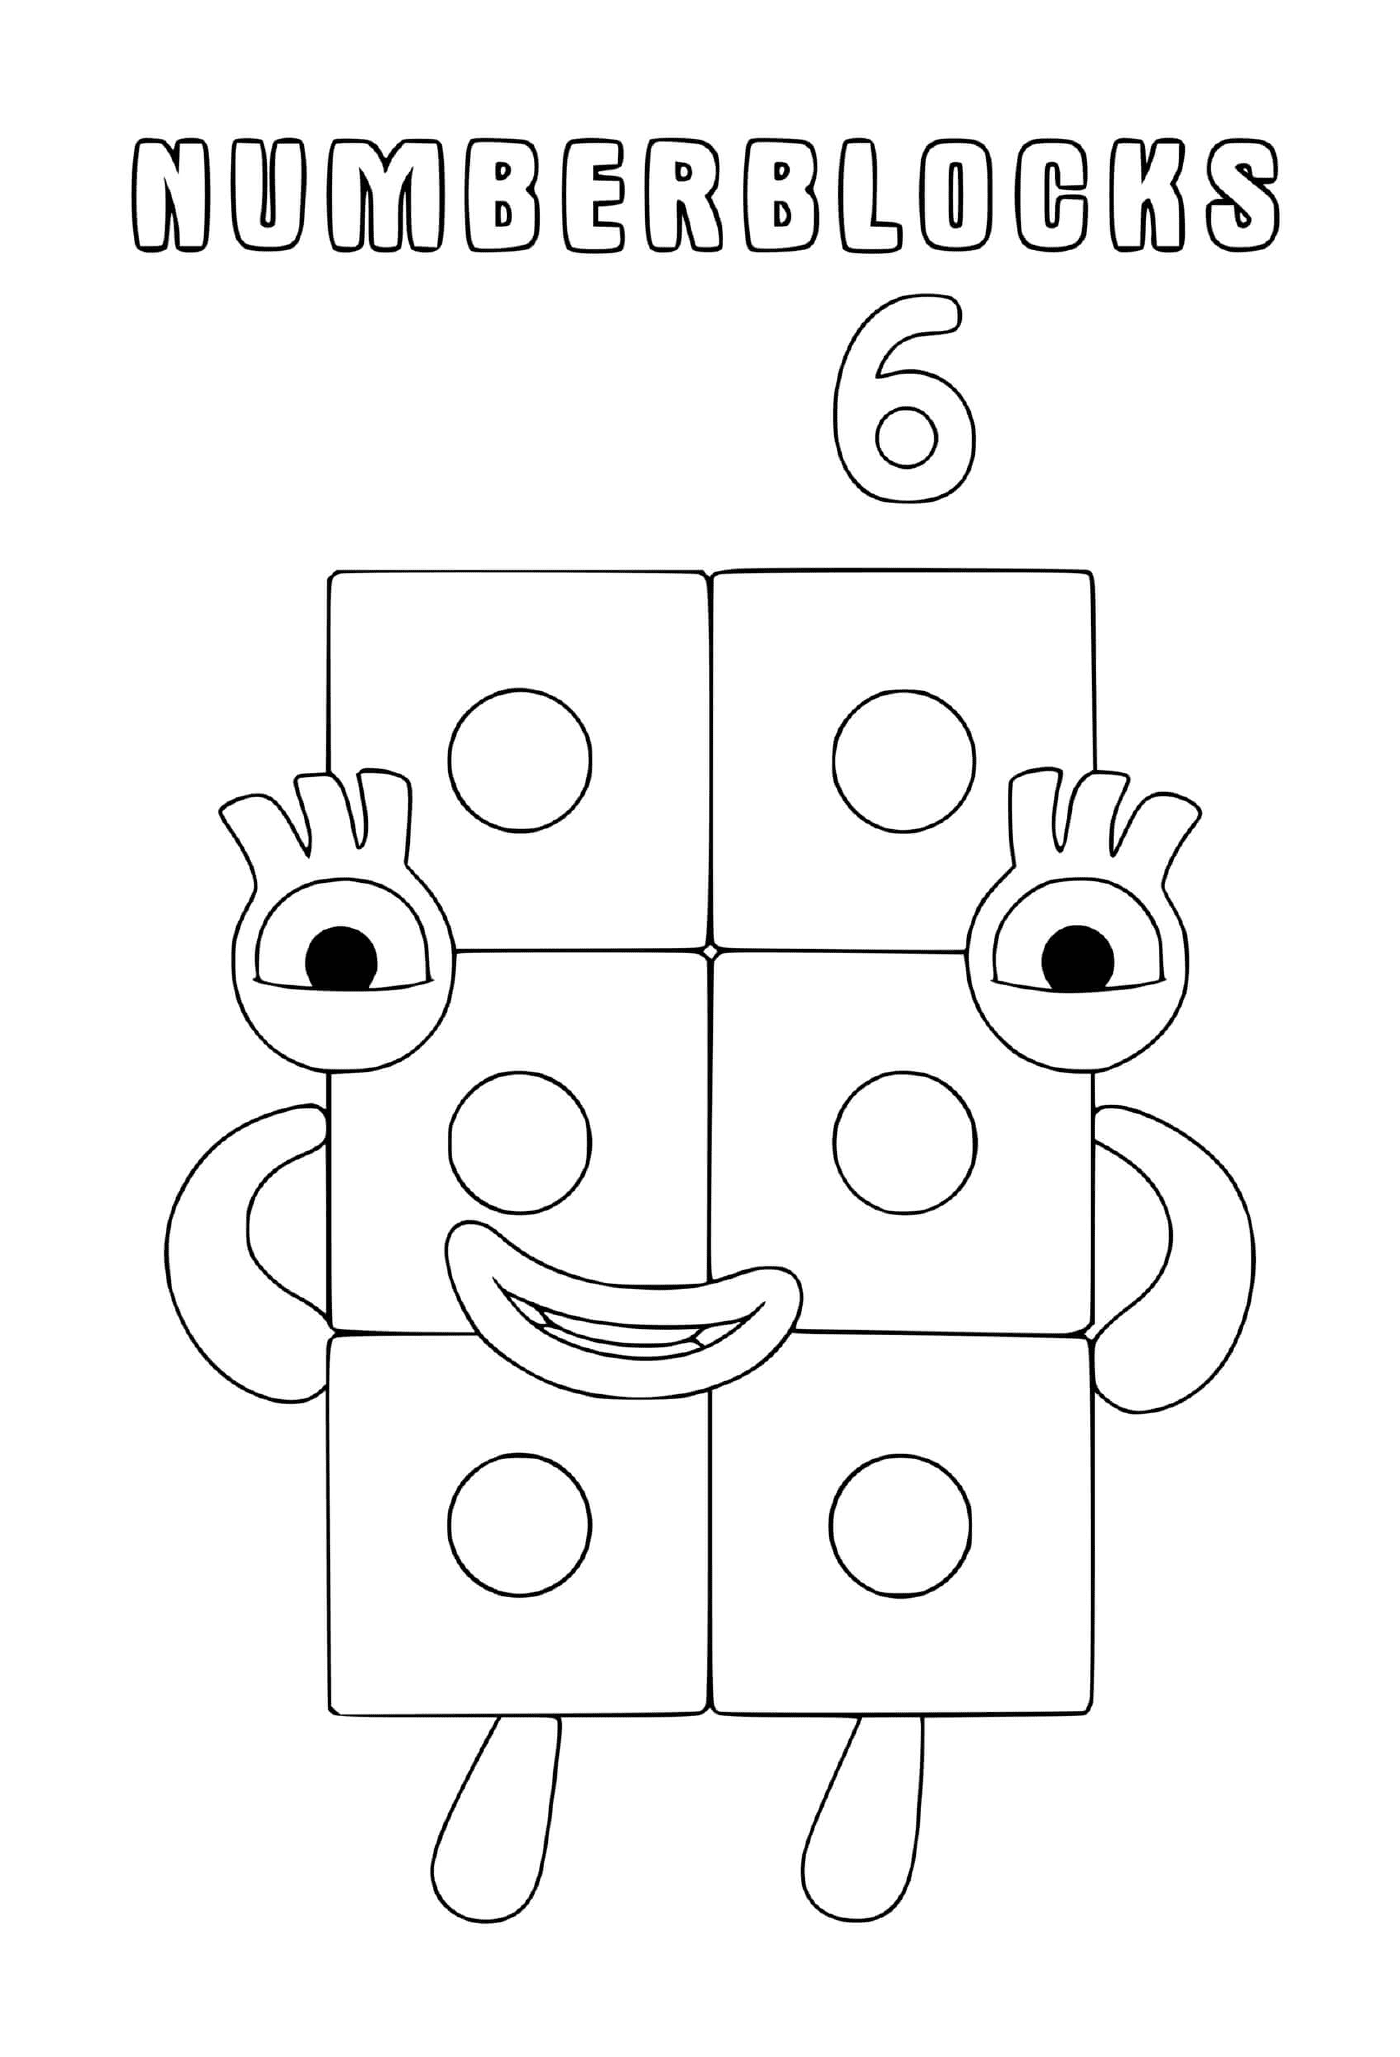  Numberblocks number 6, a block with eyes 